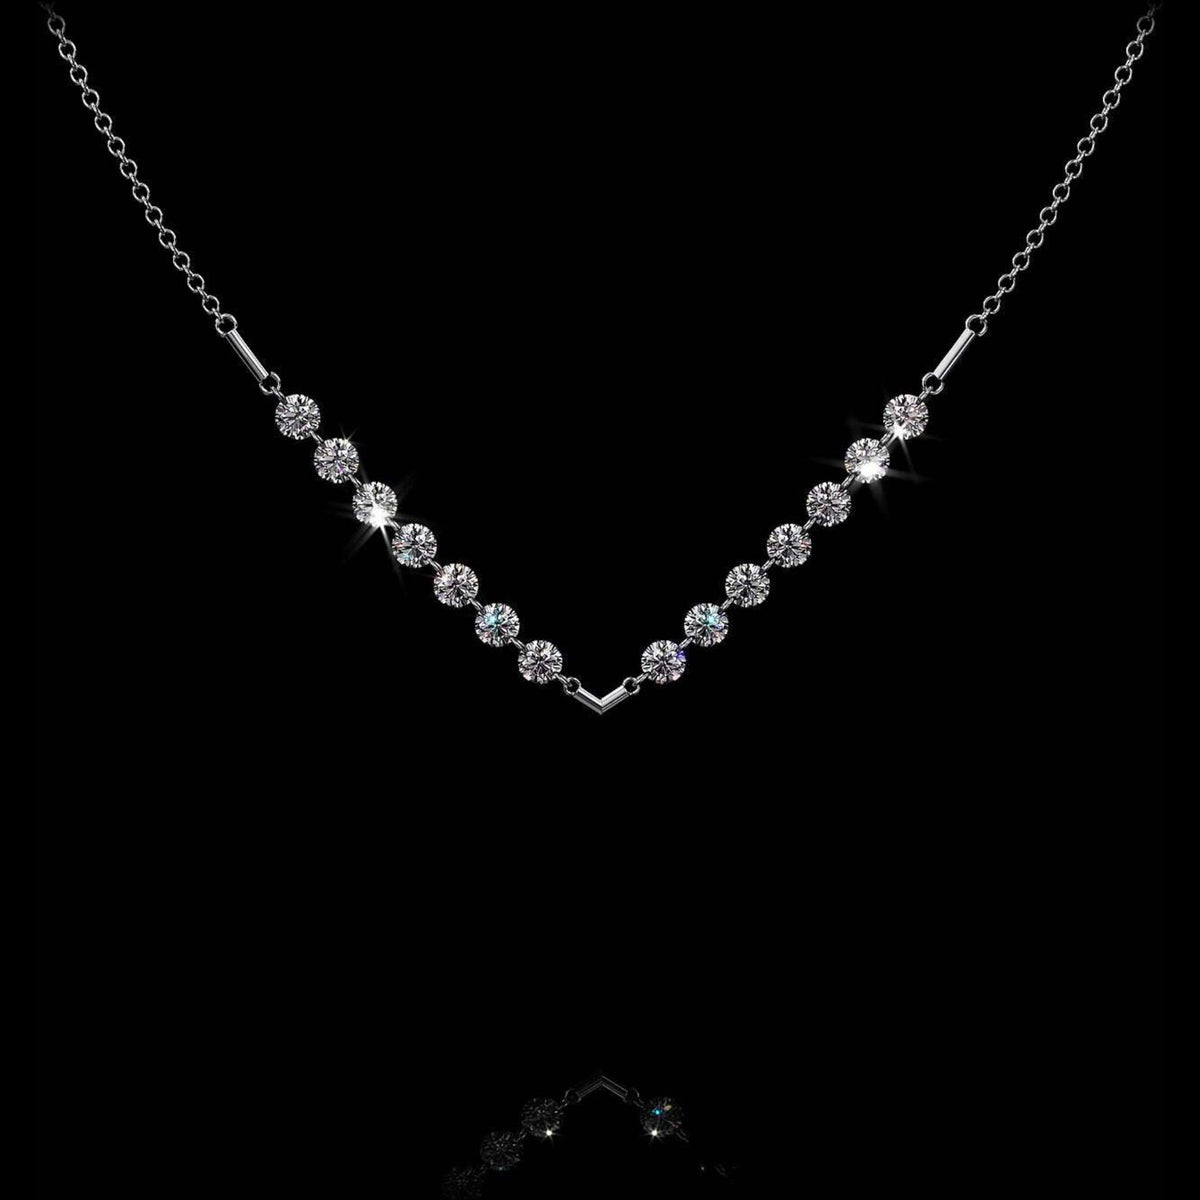 Aresa New York - Lovelace Note G Necklaces - 18K White Gold with 1.10 cts. of Diamonds